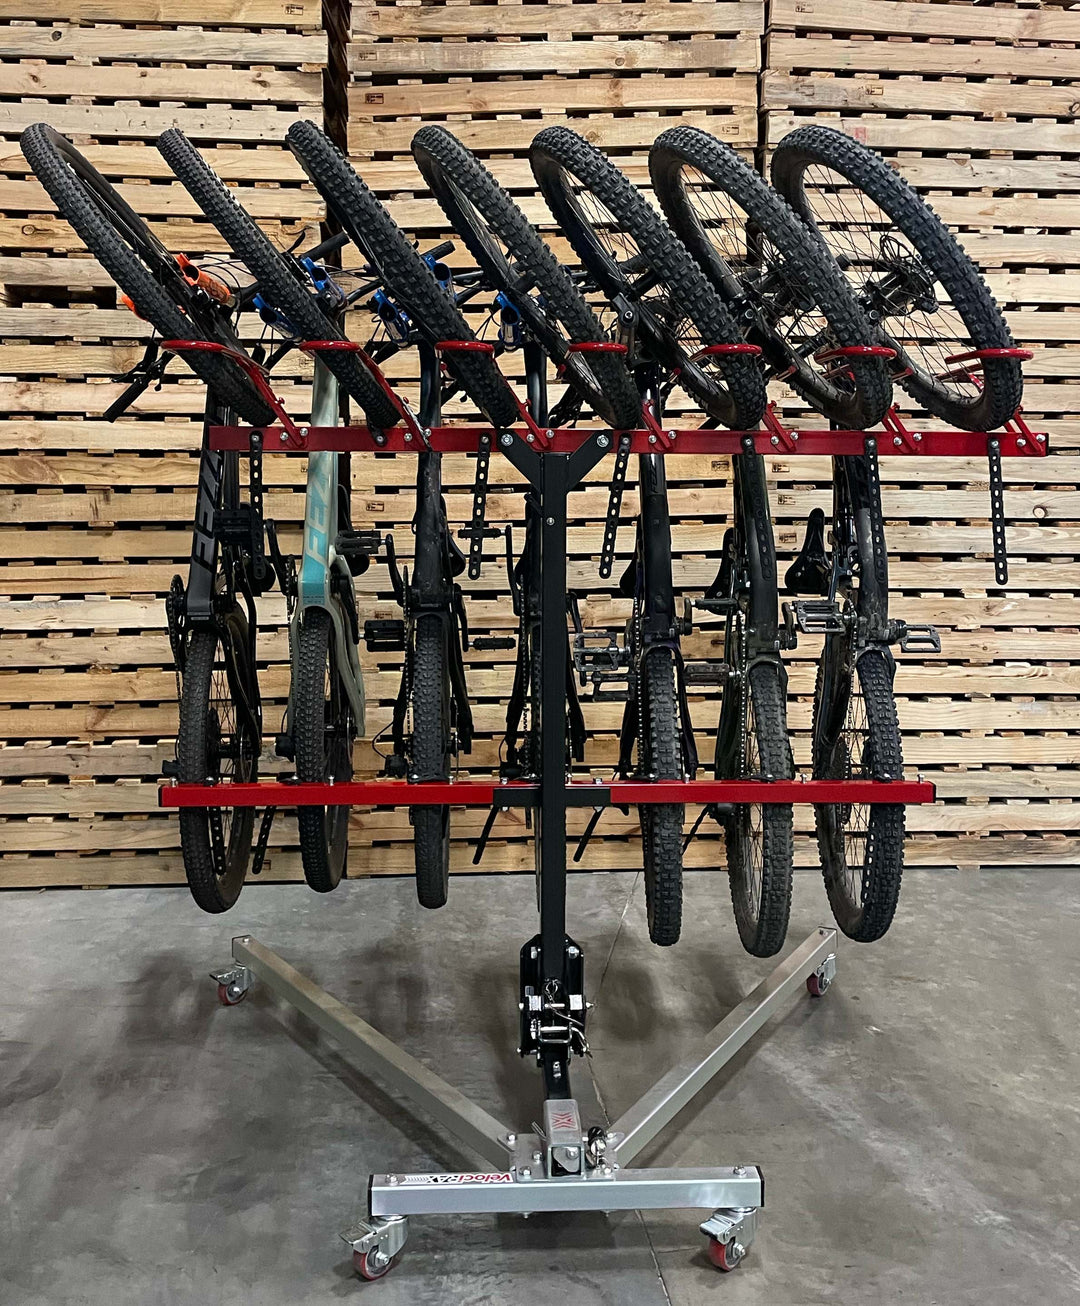 Bike Rack Rolling Stand holding a VelociRAX 7 with 7 bikes on it.